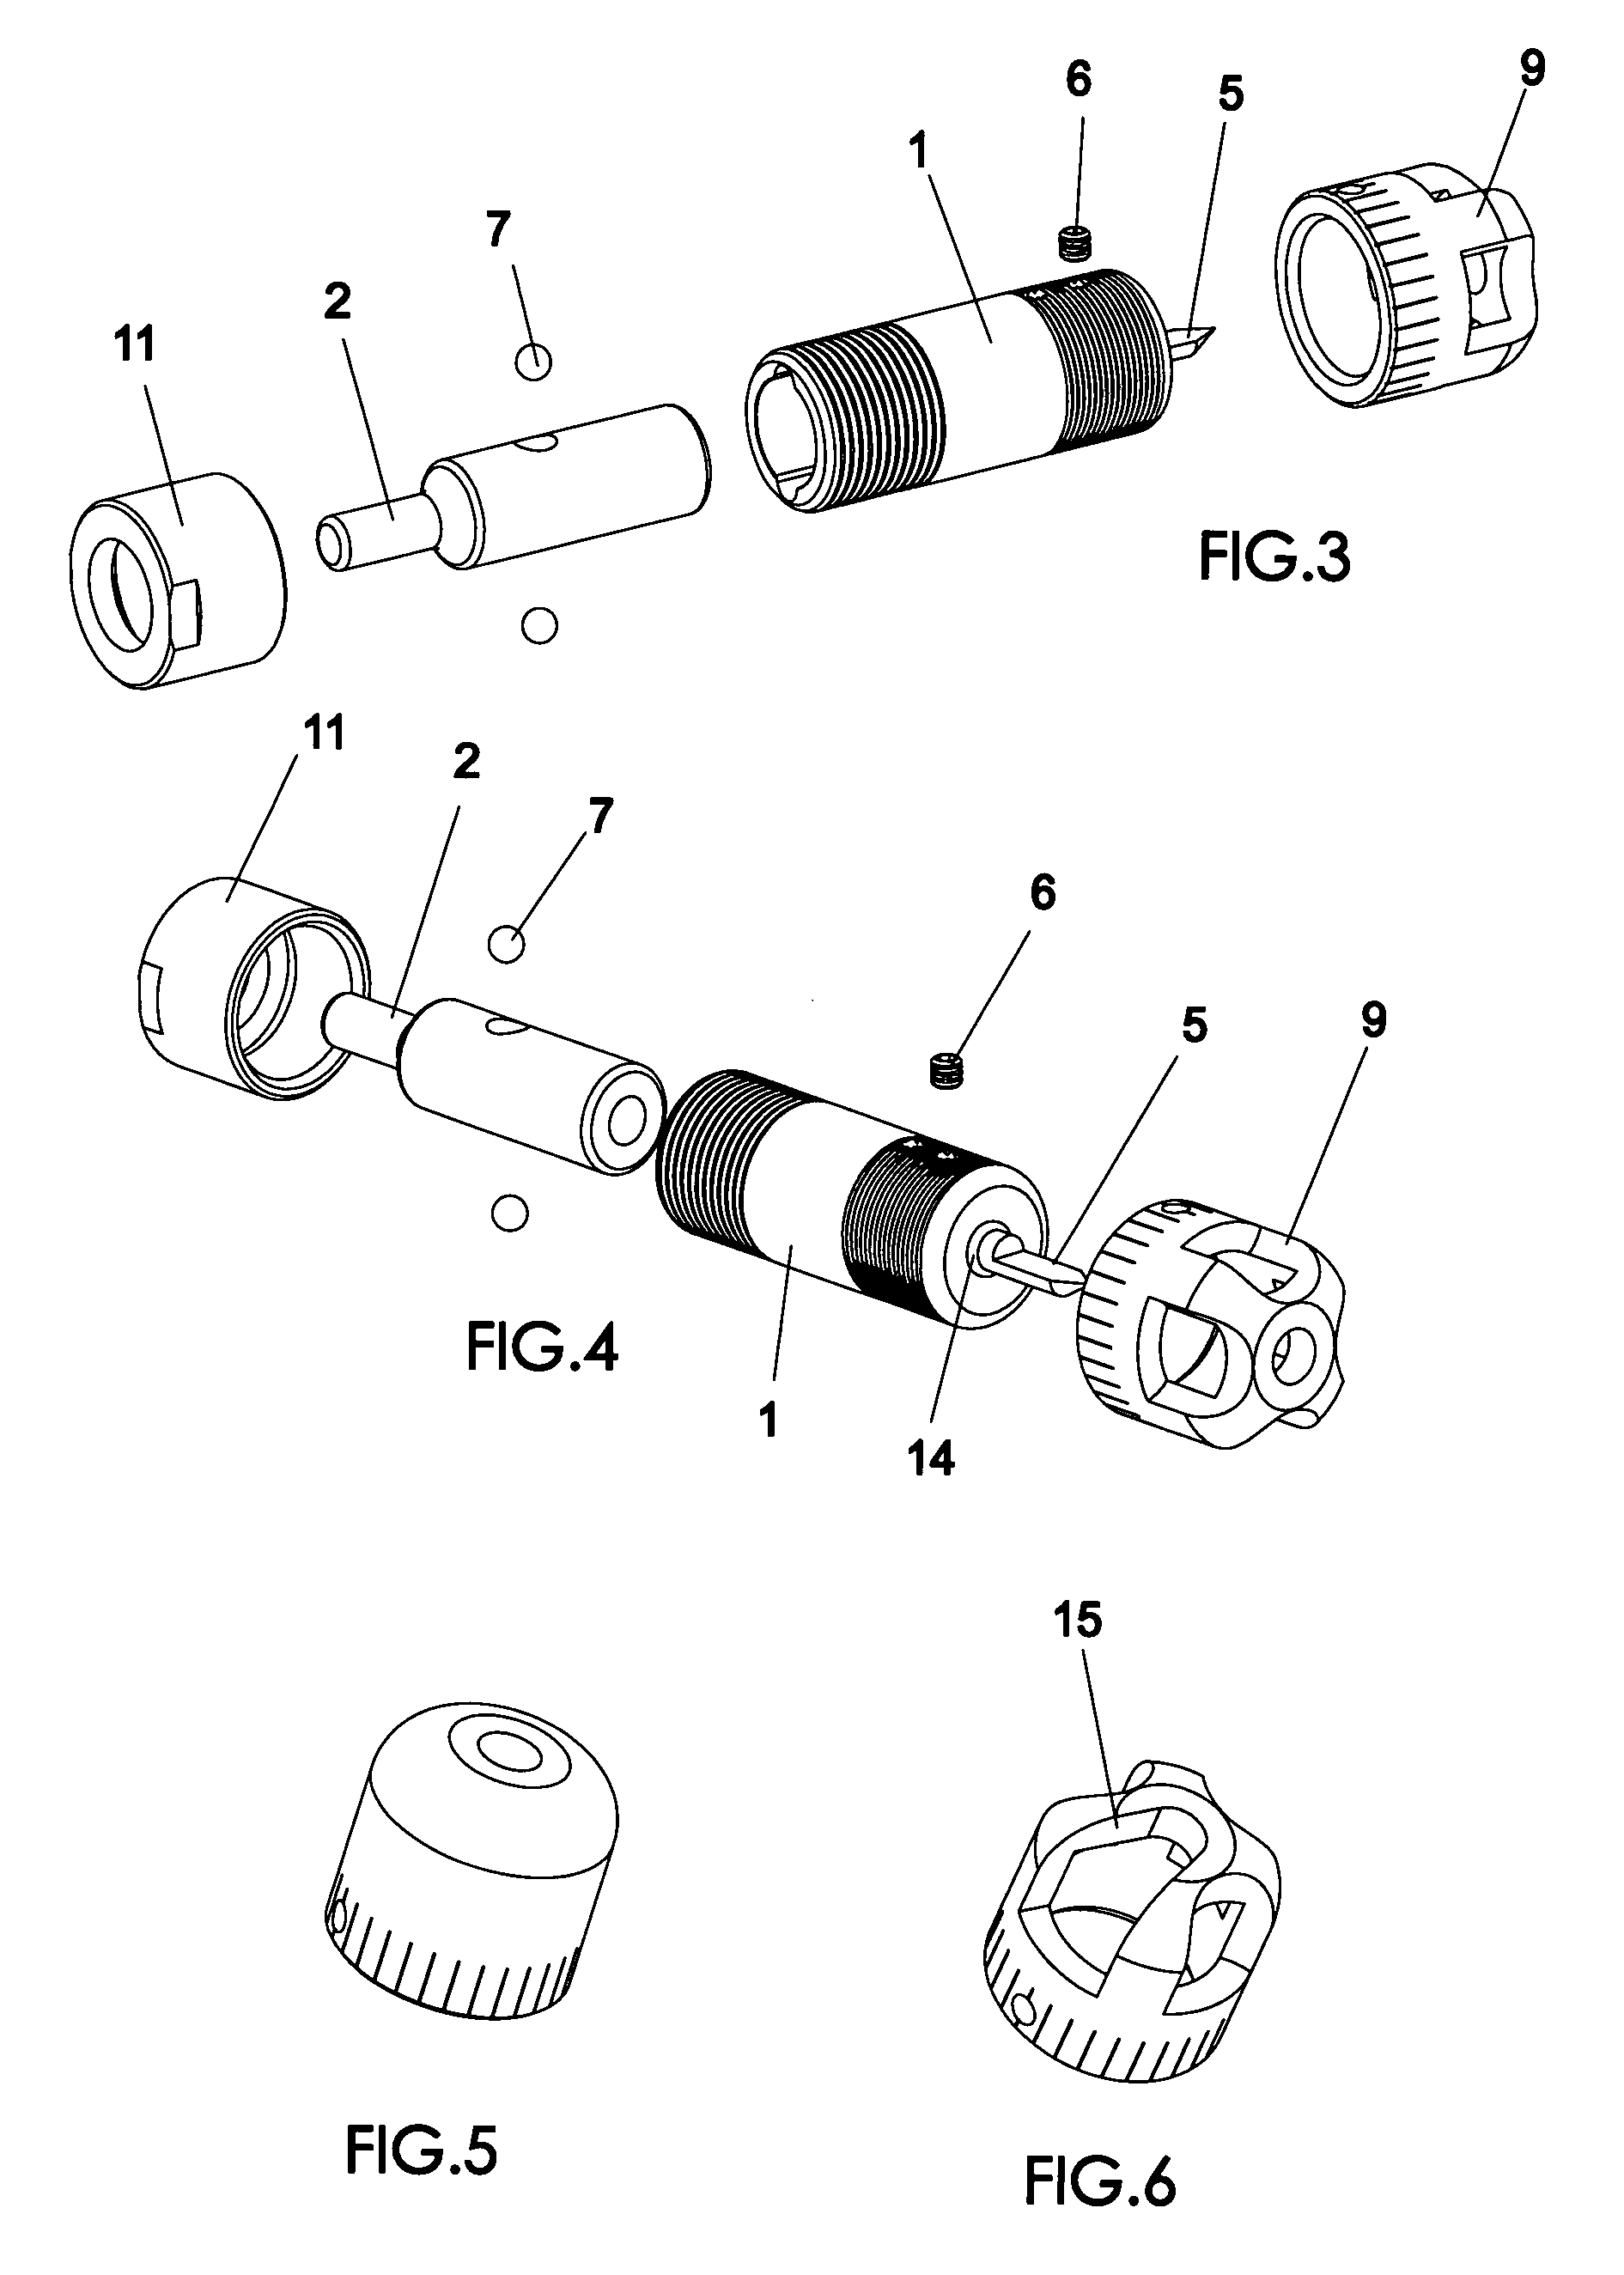 Spring loaded tool with floating depth control for countersinking holes or engraving